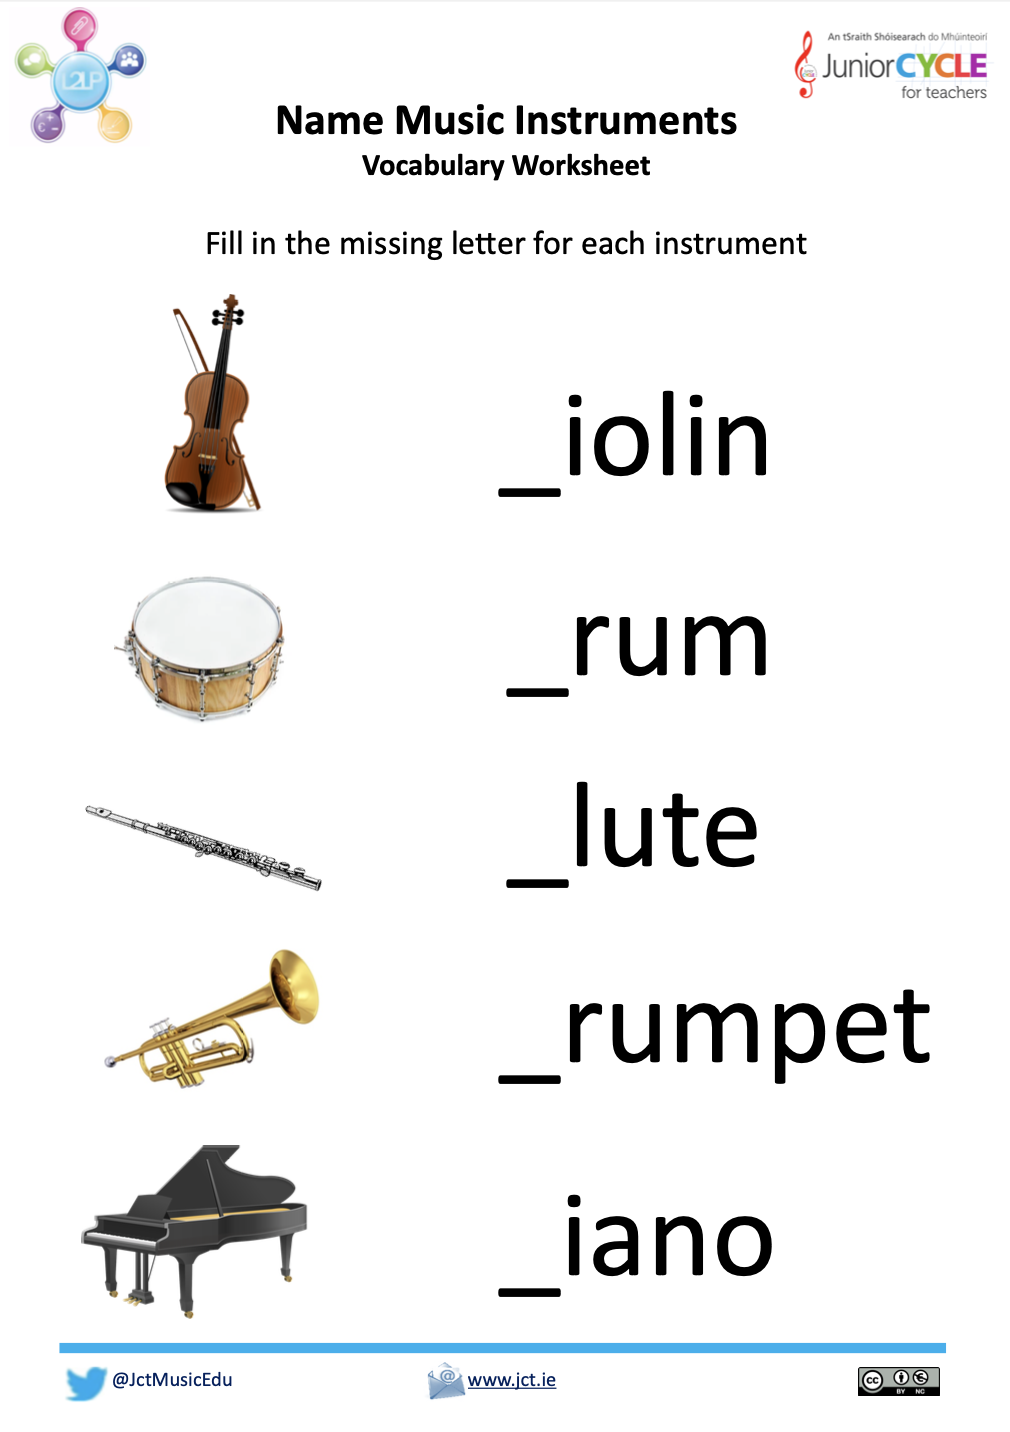 Name Music Instruments